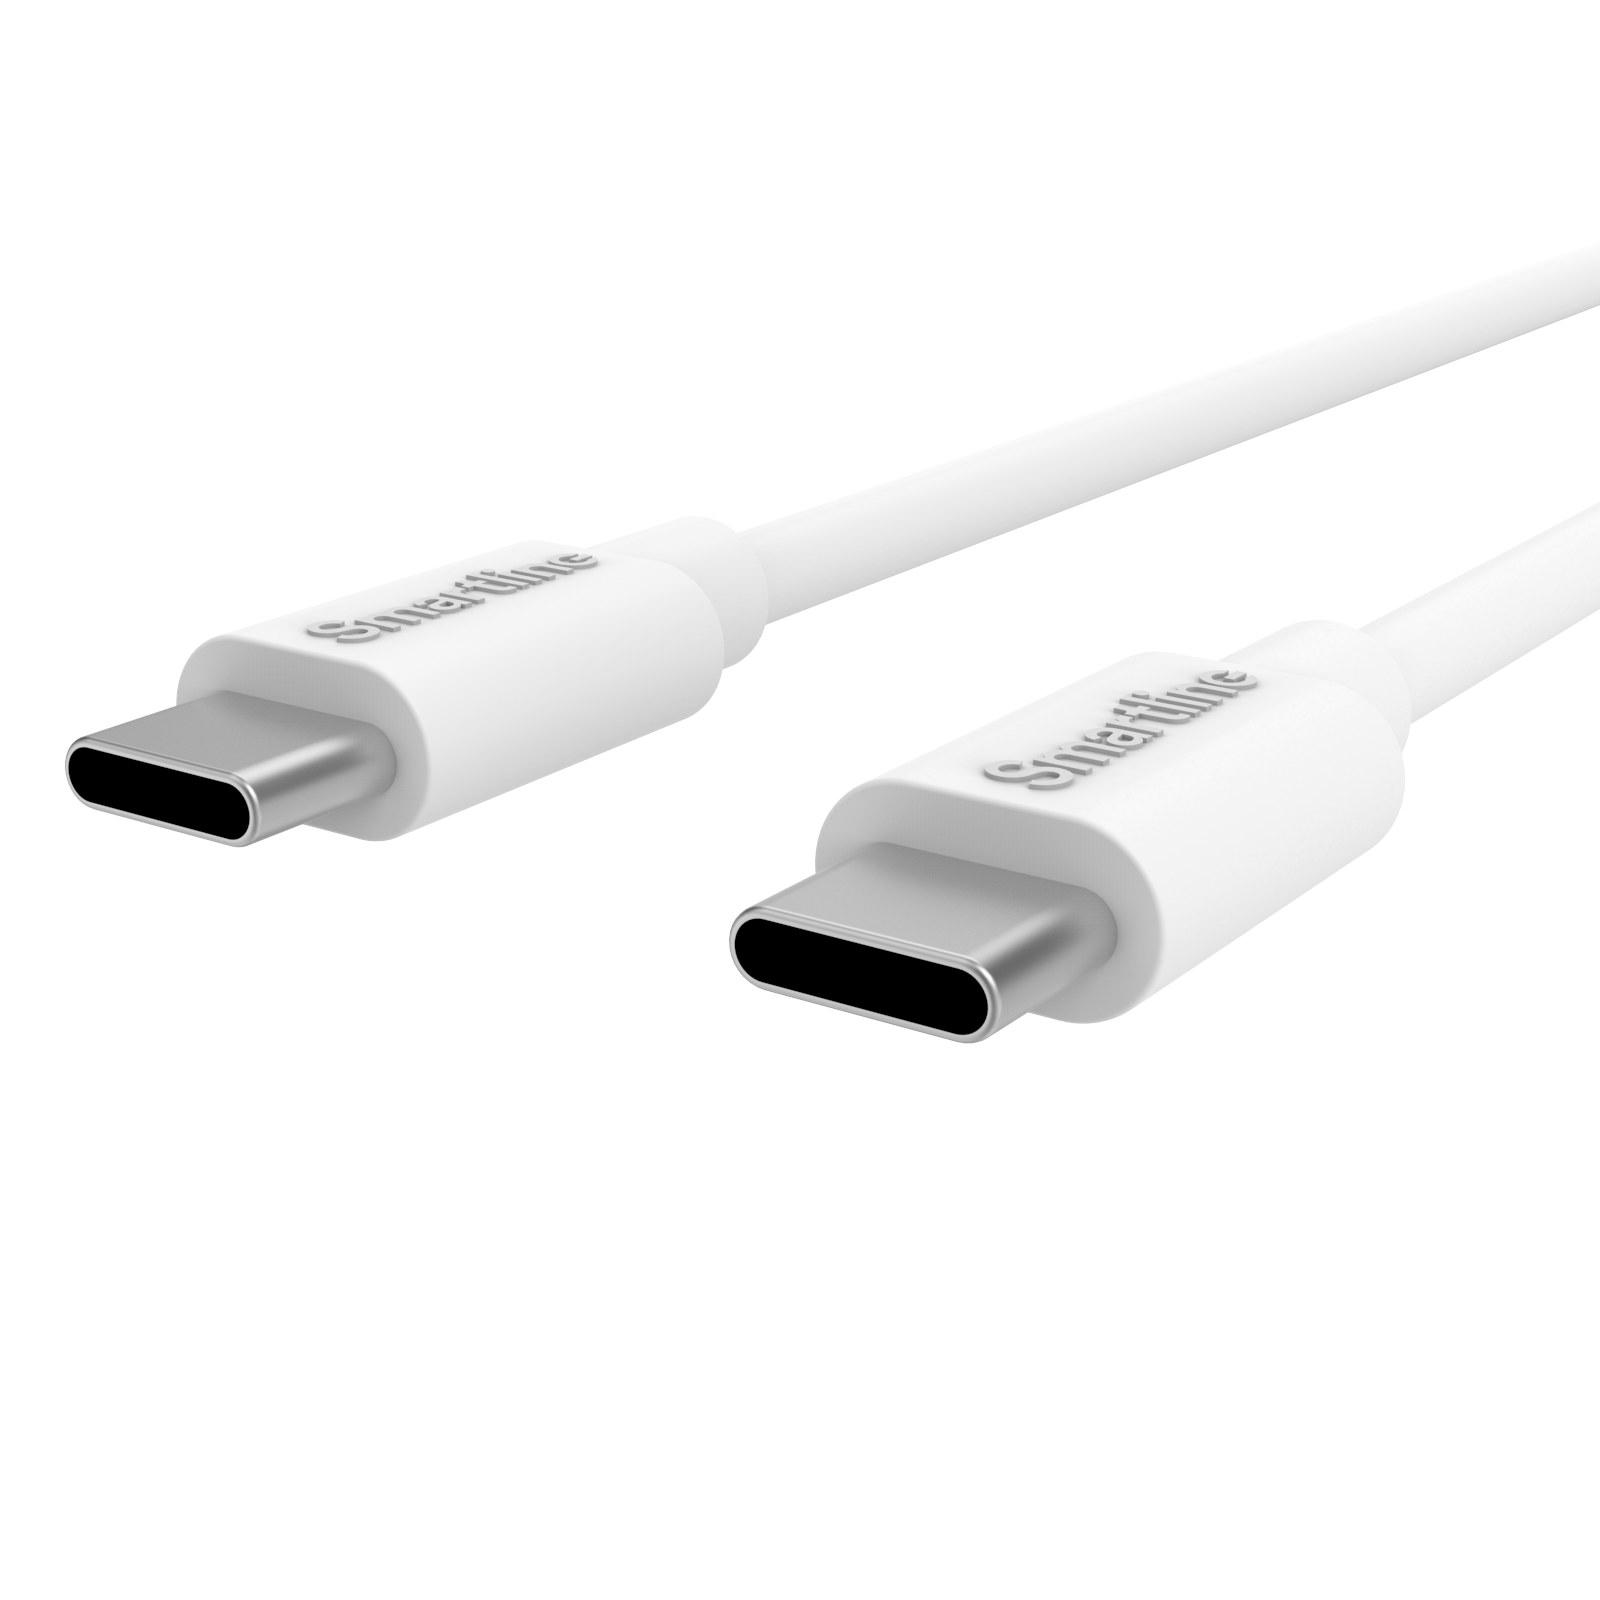 Premium Charger Sony Xperia 1 VI - 2 meter Cable and Dual Wall Charger USB-C 35W - Smartline